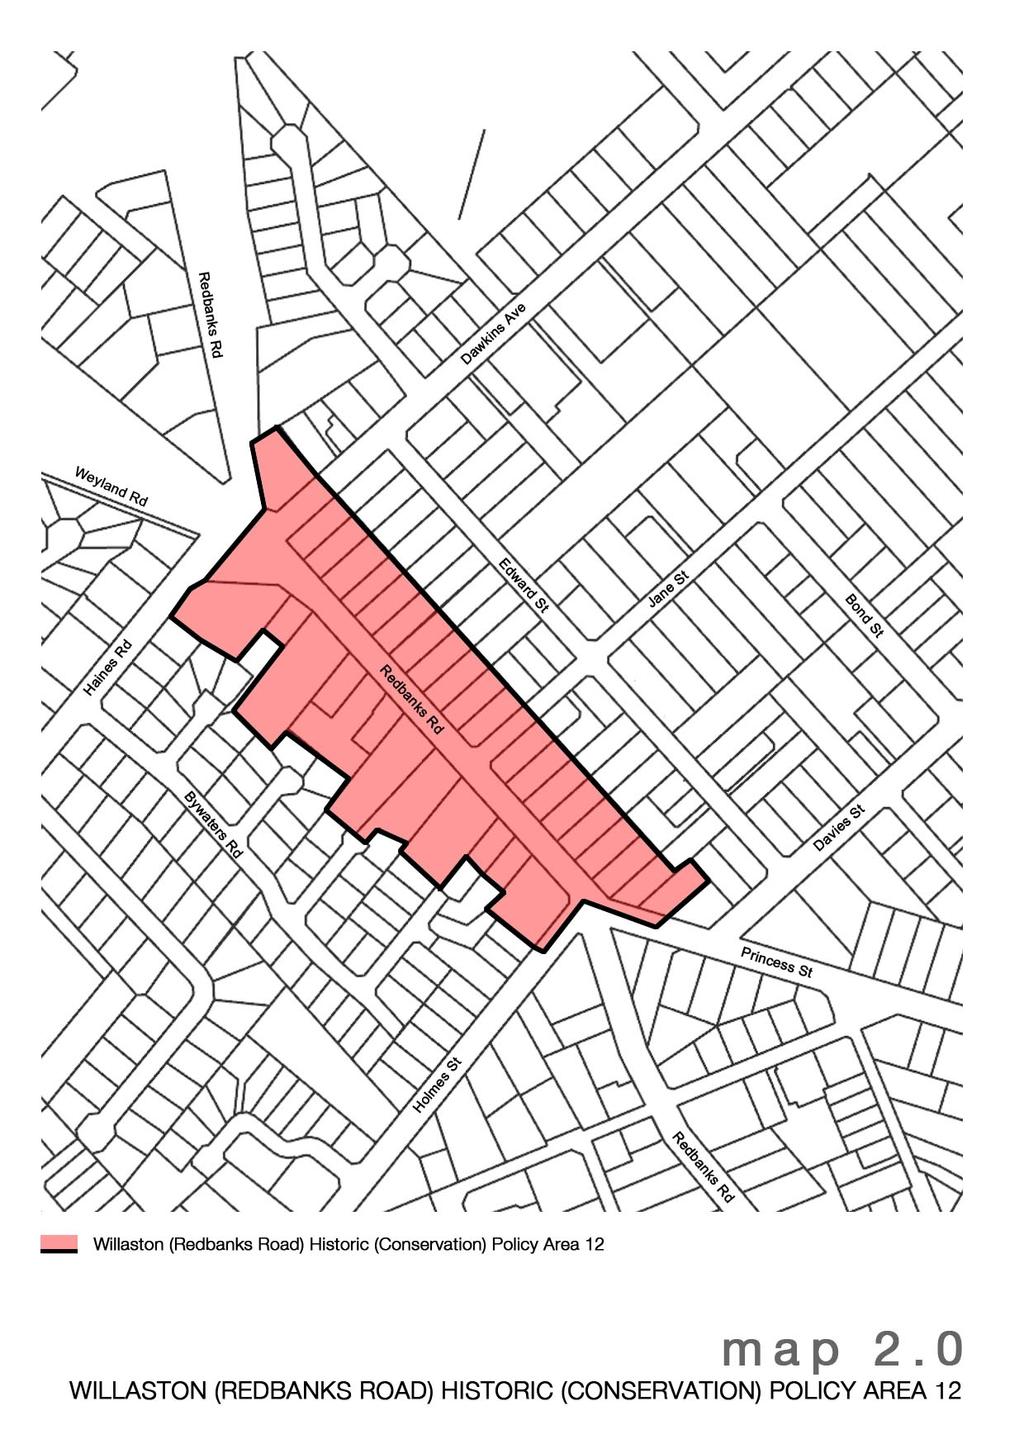 1.5 Policy Areas 1.5.1 Willaston (Redbanks Road) Residential Historic (Conservation) Policy Area 12 Significance This area, originally known as Waltham, contains a number of high integrity residences